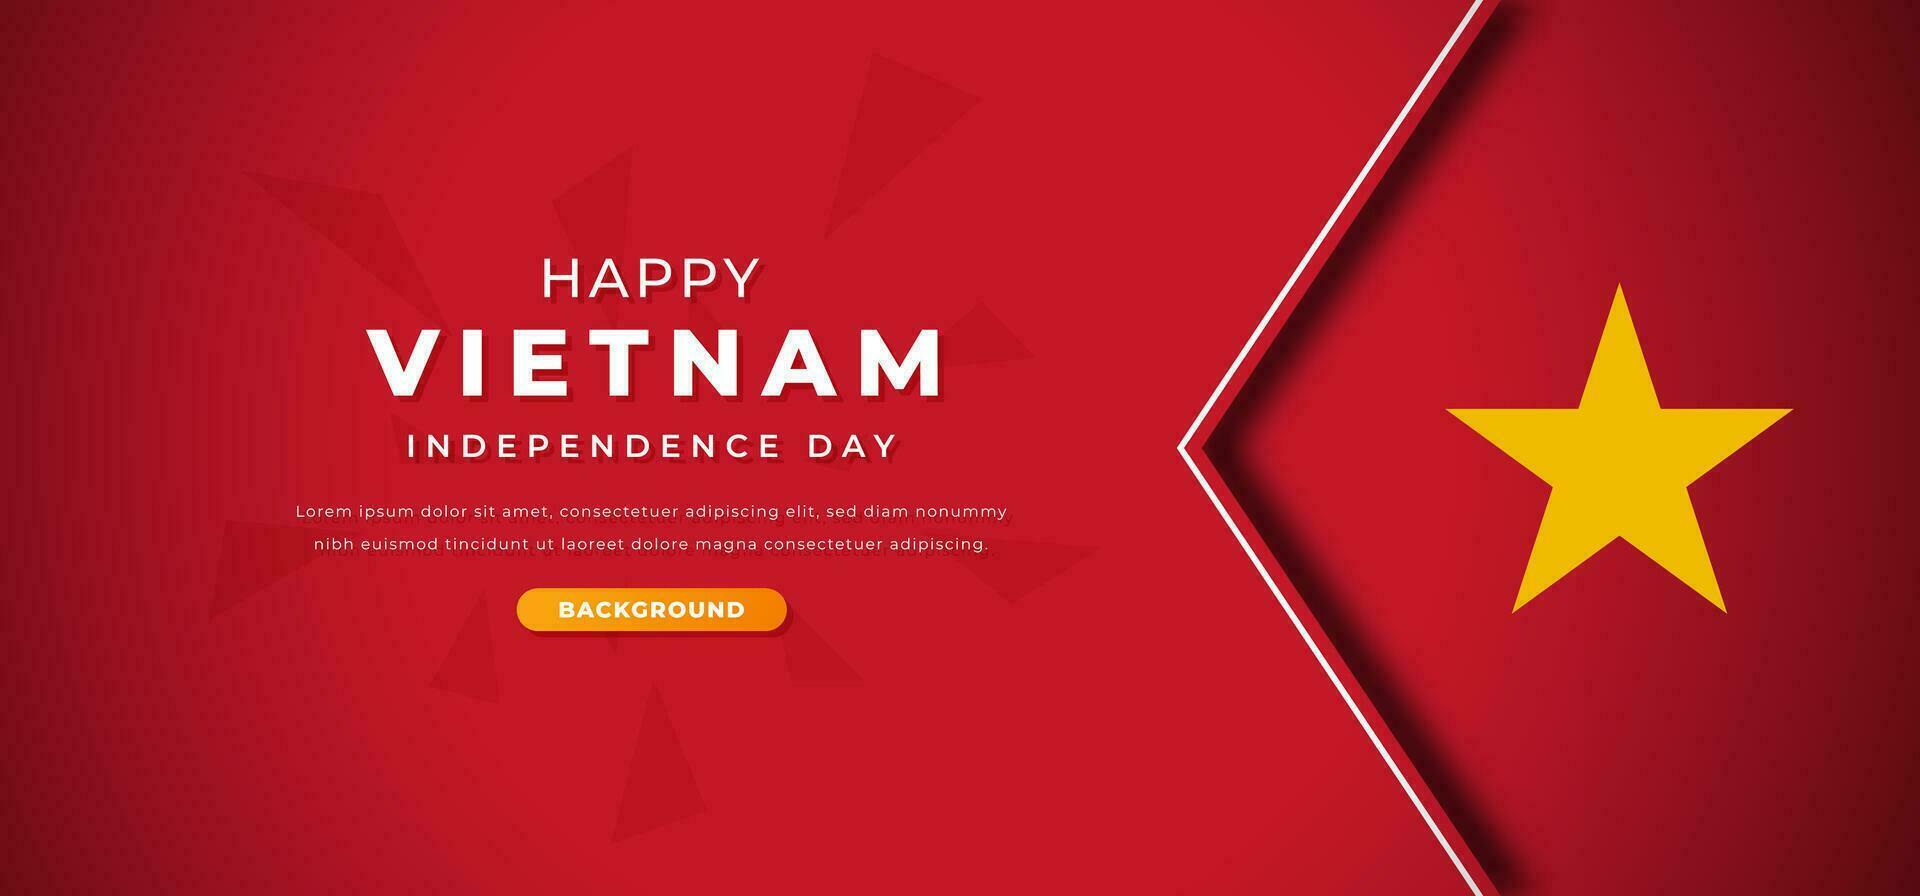 Happy Vietman Independence Day Design Paper Cut Shapes Background Illustration for Poster, Banner, Advertising, Greeting Card vector